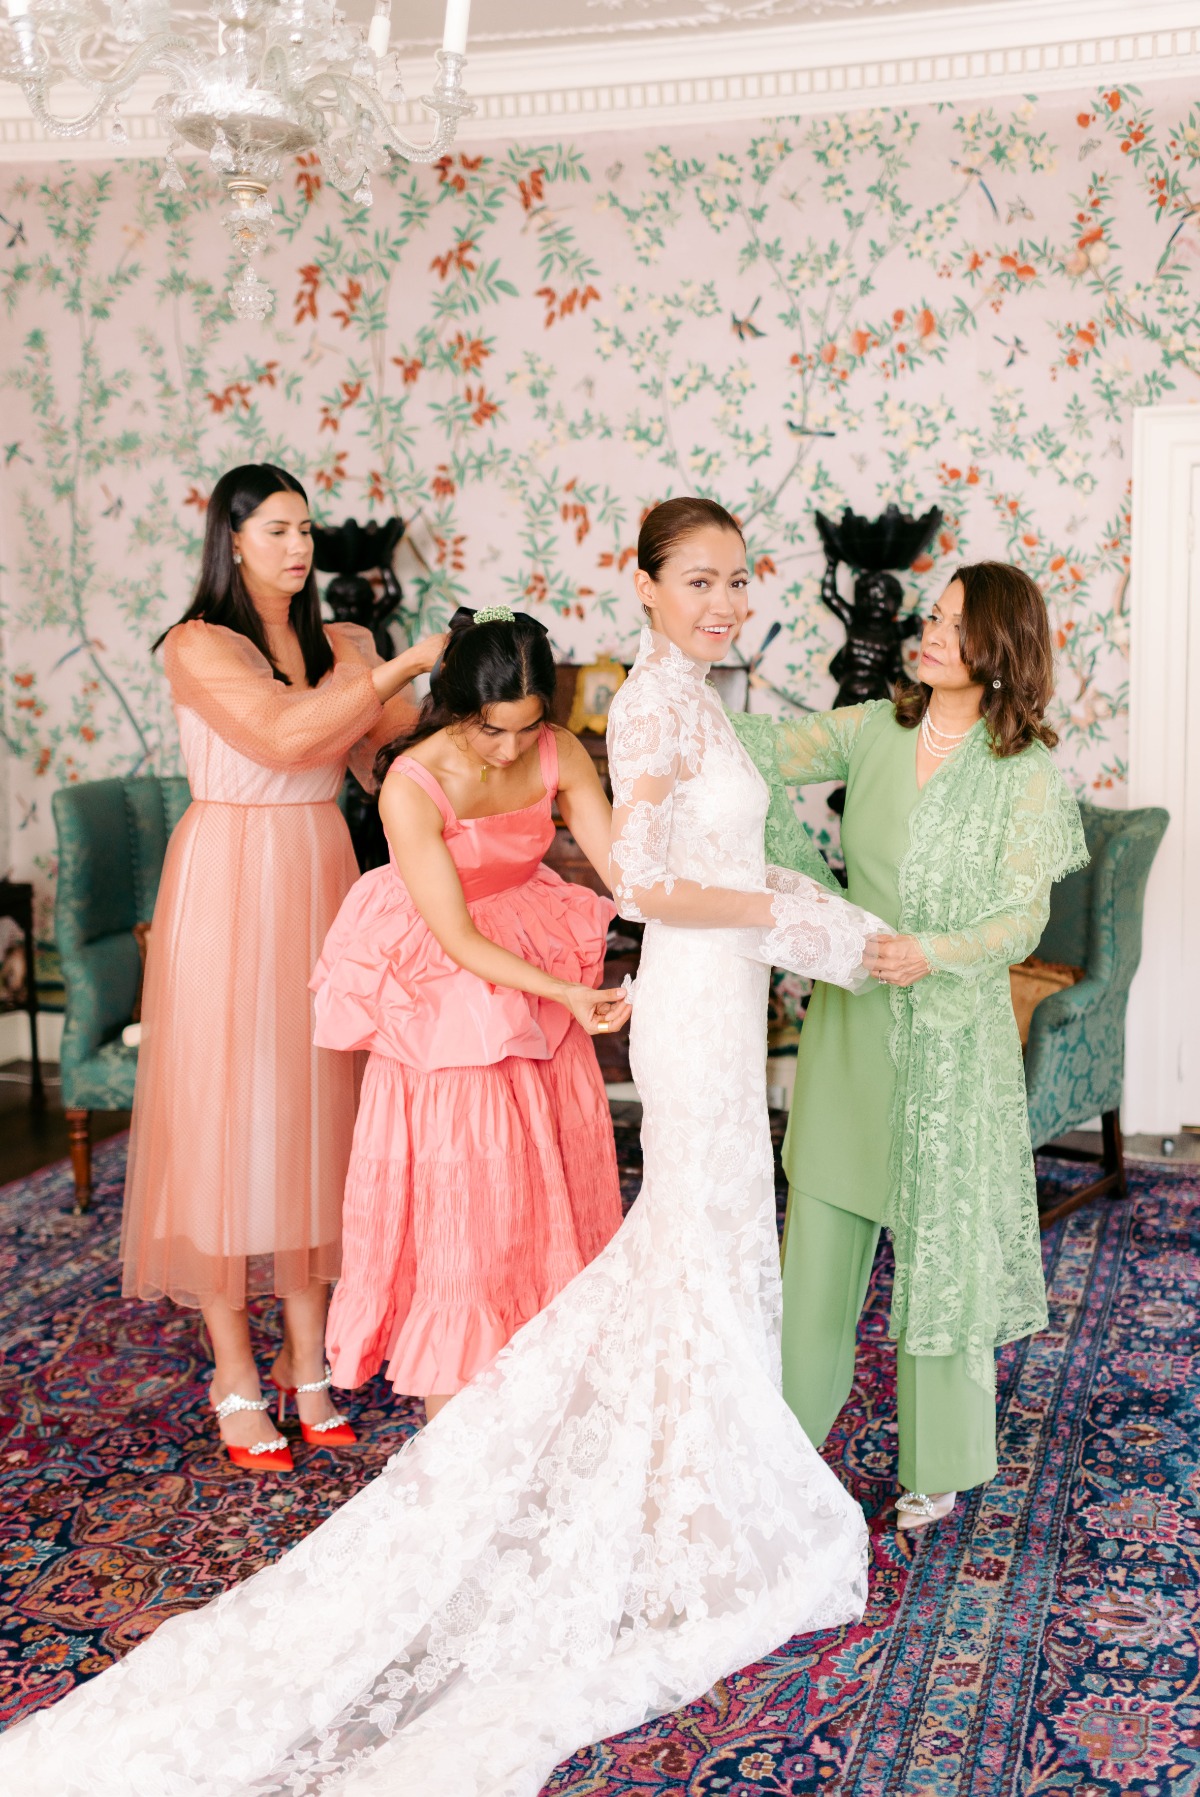 getting wedding ready with family photo ideas